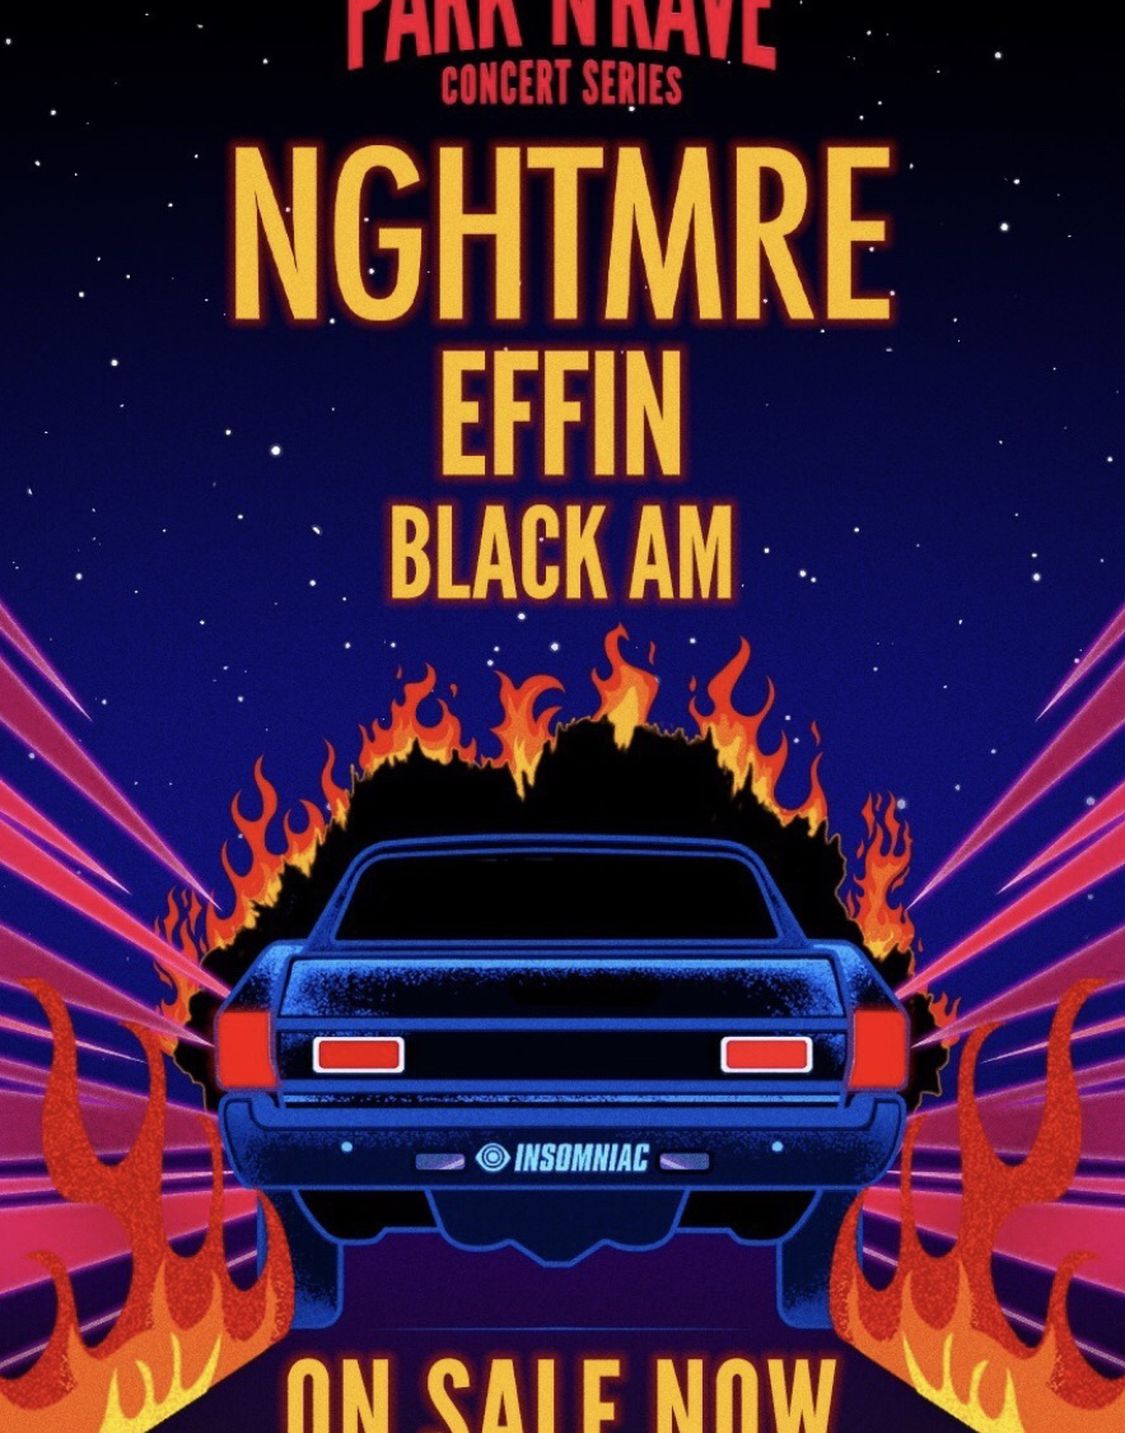 NGHTMRE - Friday, February 12th Park ‘N Rave